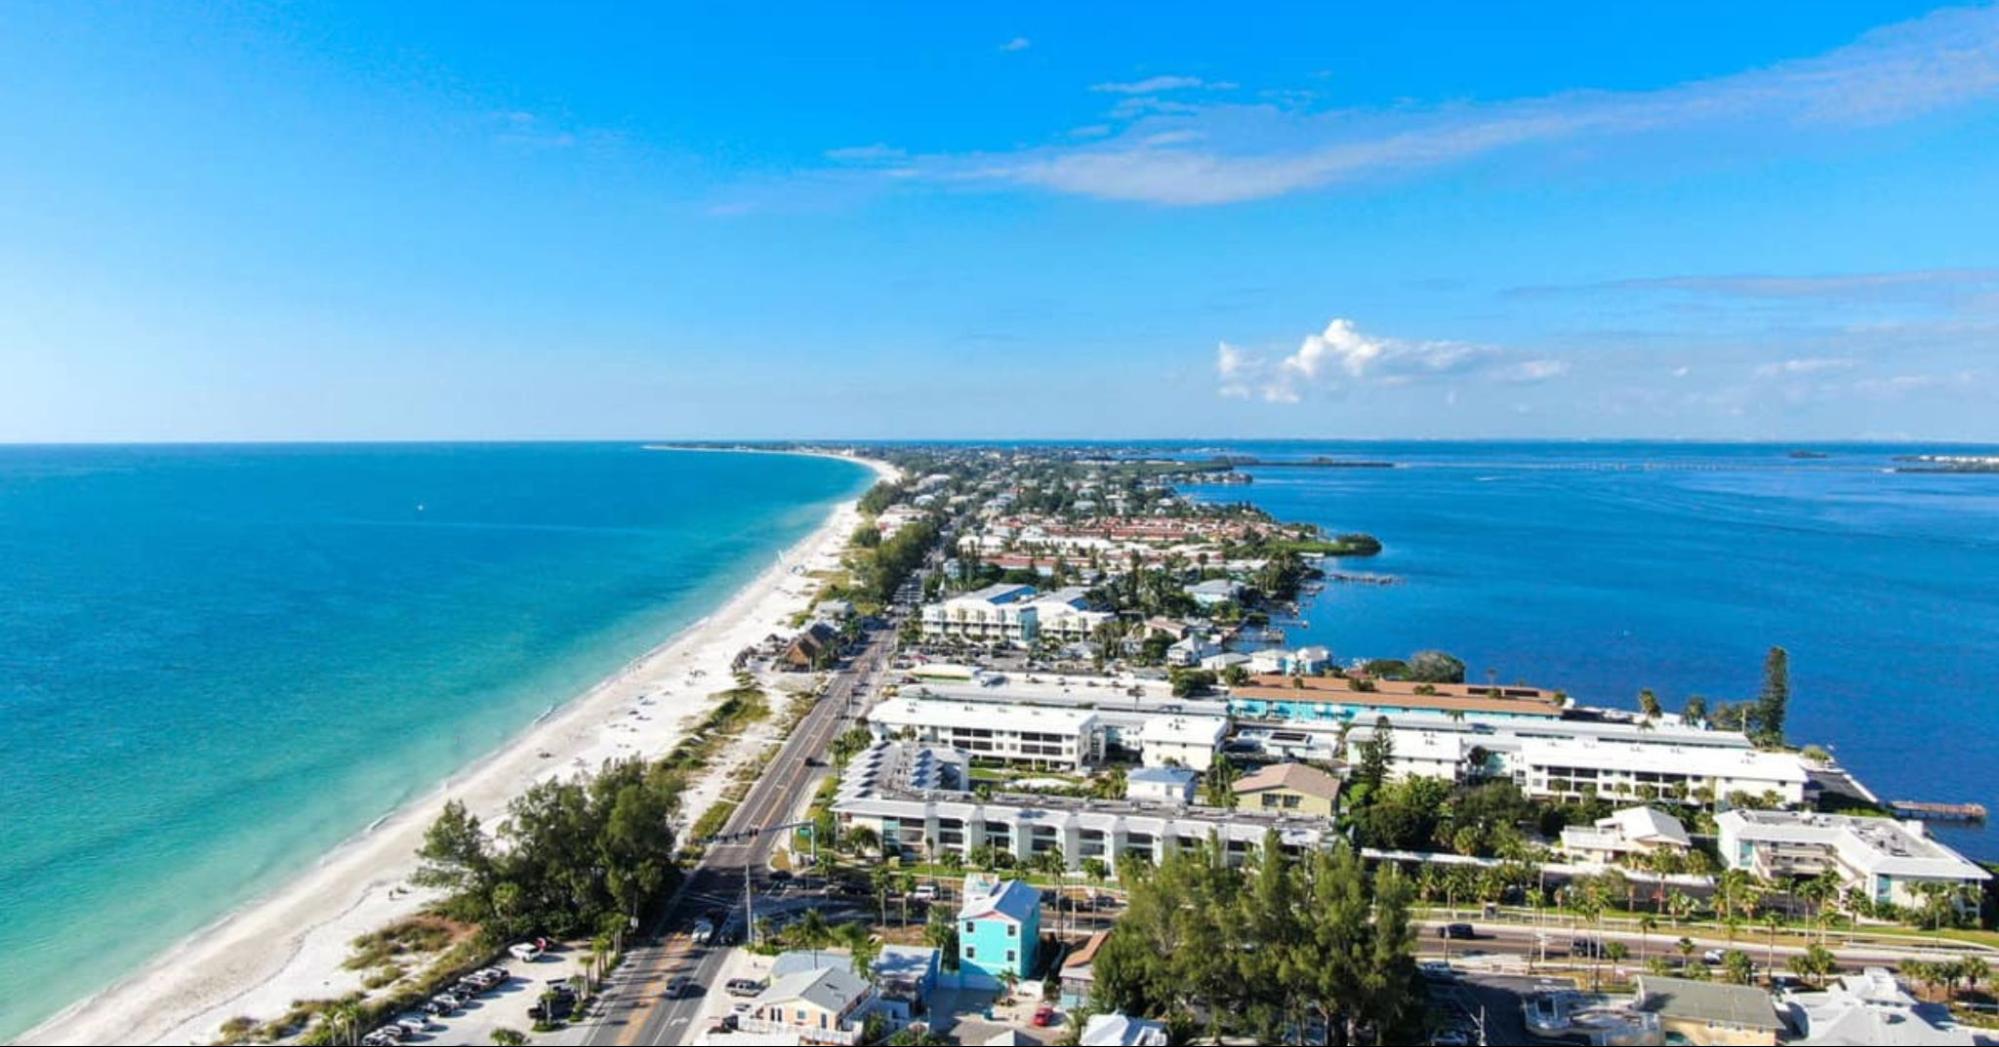 Is Anna Maria Island worth going to